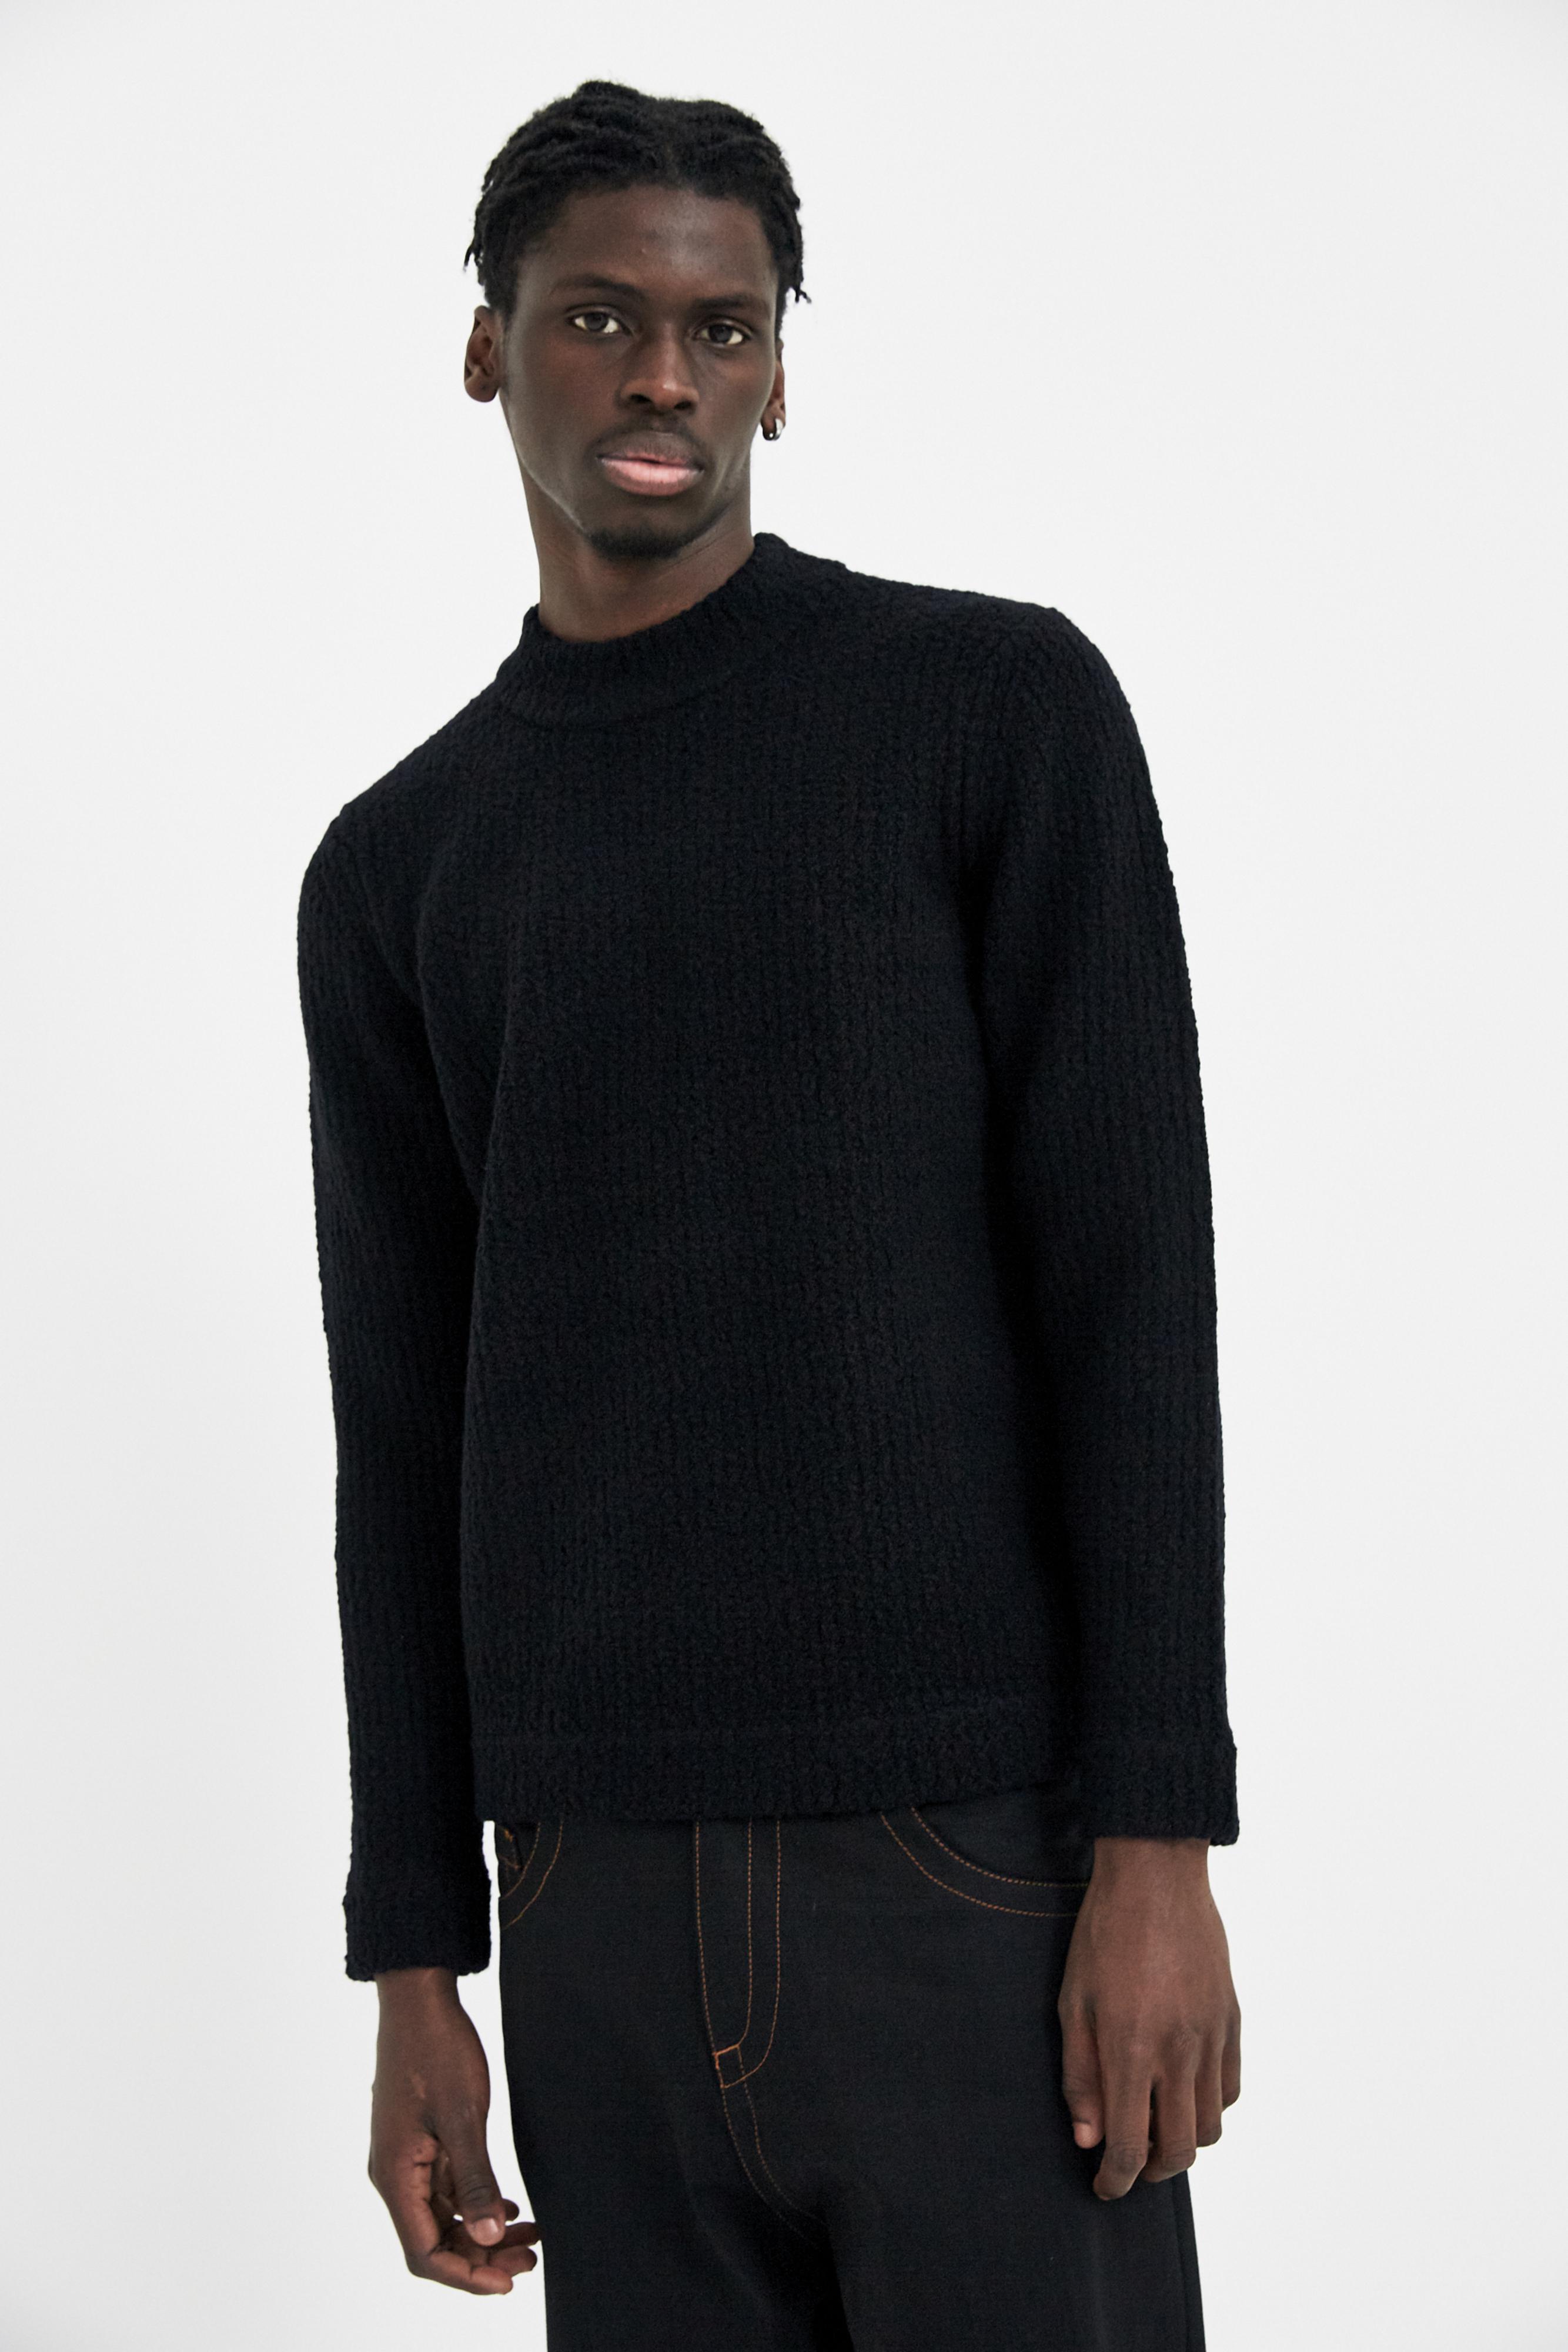 Lyst - Craig Green Black Ribbed Sweater in Black for Men